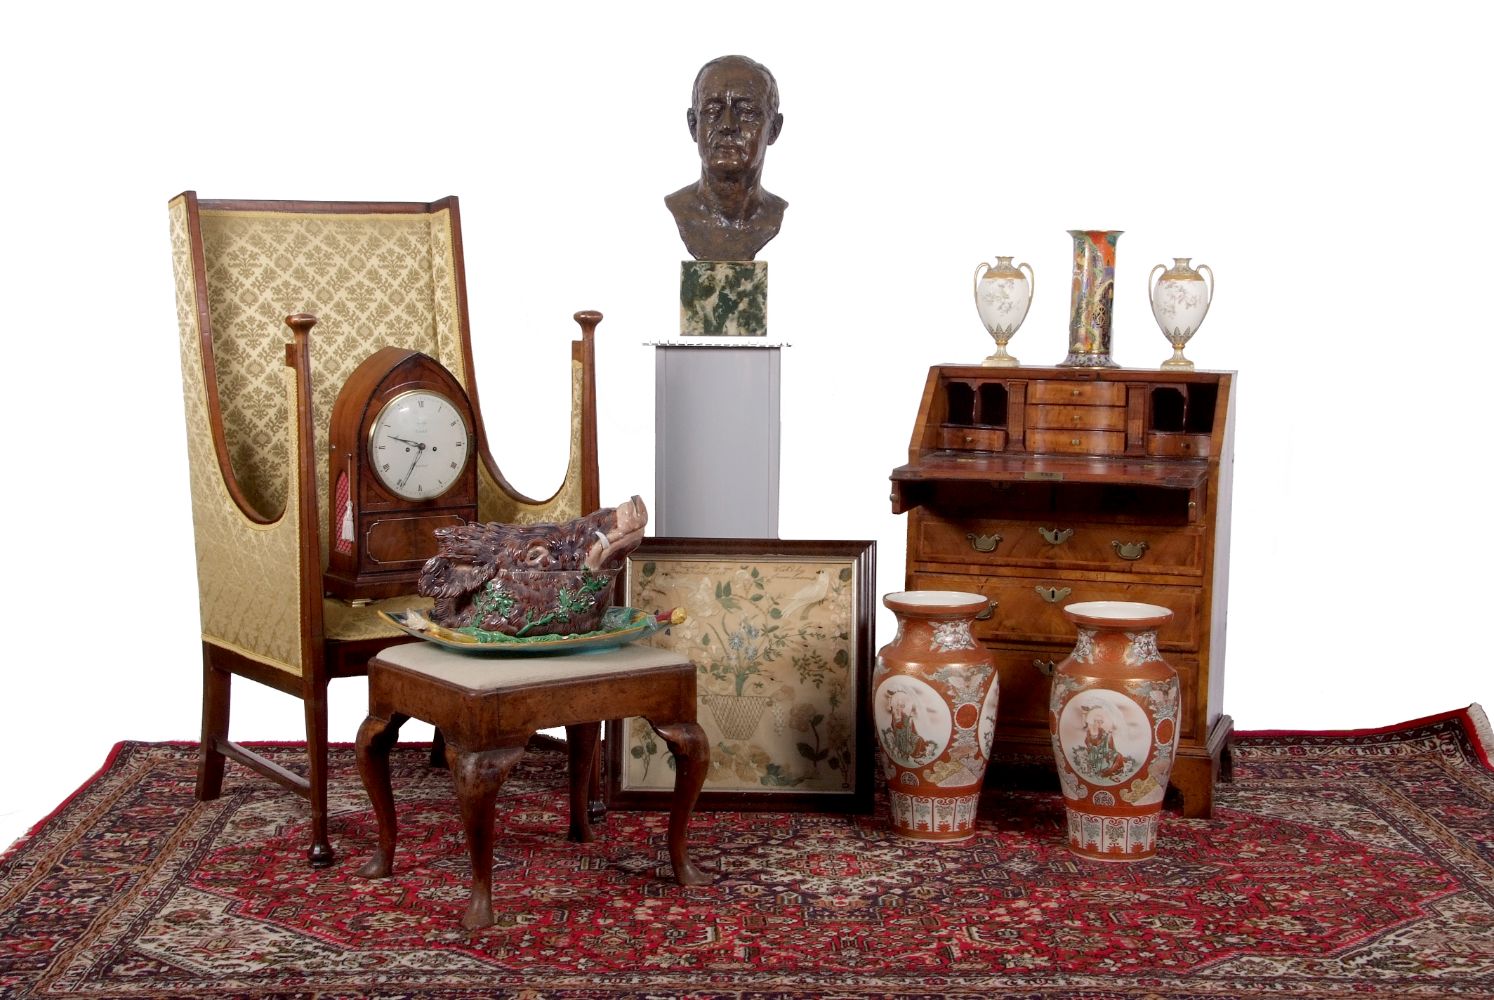 Three Day Fine Sale of selected Art & Antiques, Jewellery, Silver, Clocks, Watches, Furniture, and more